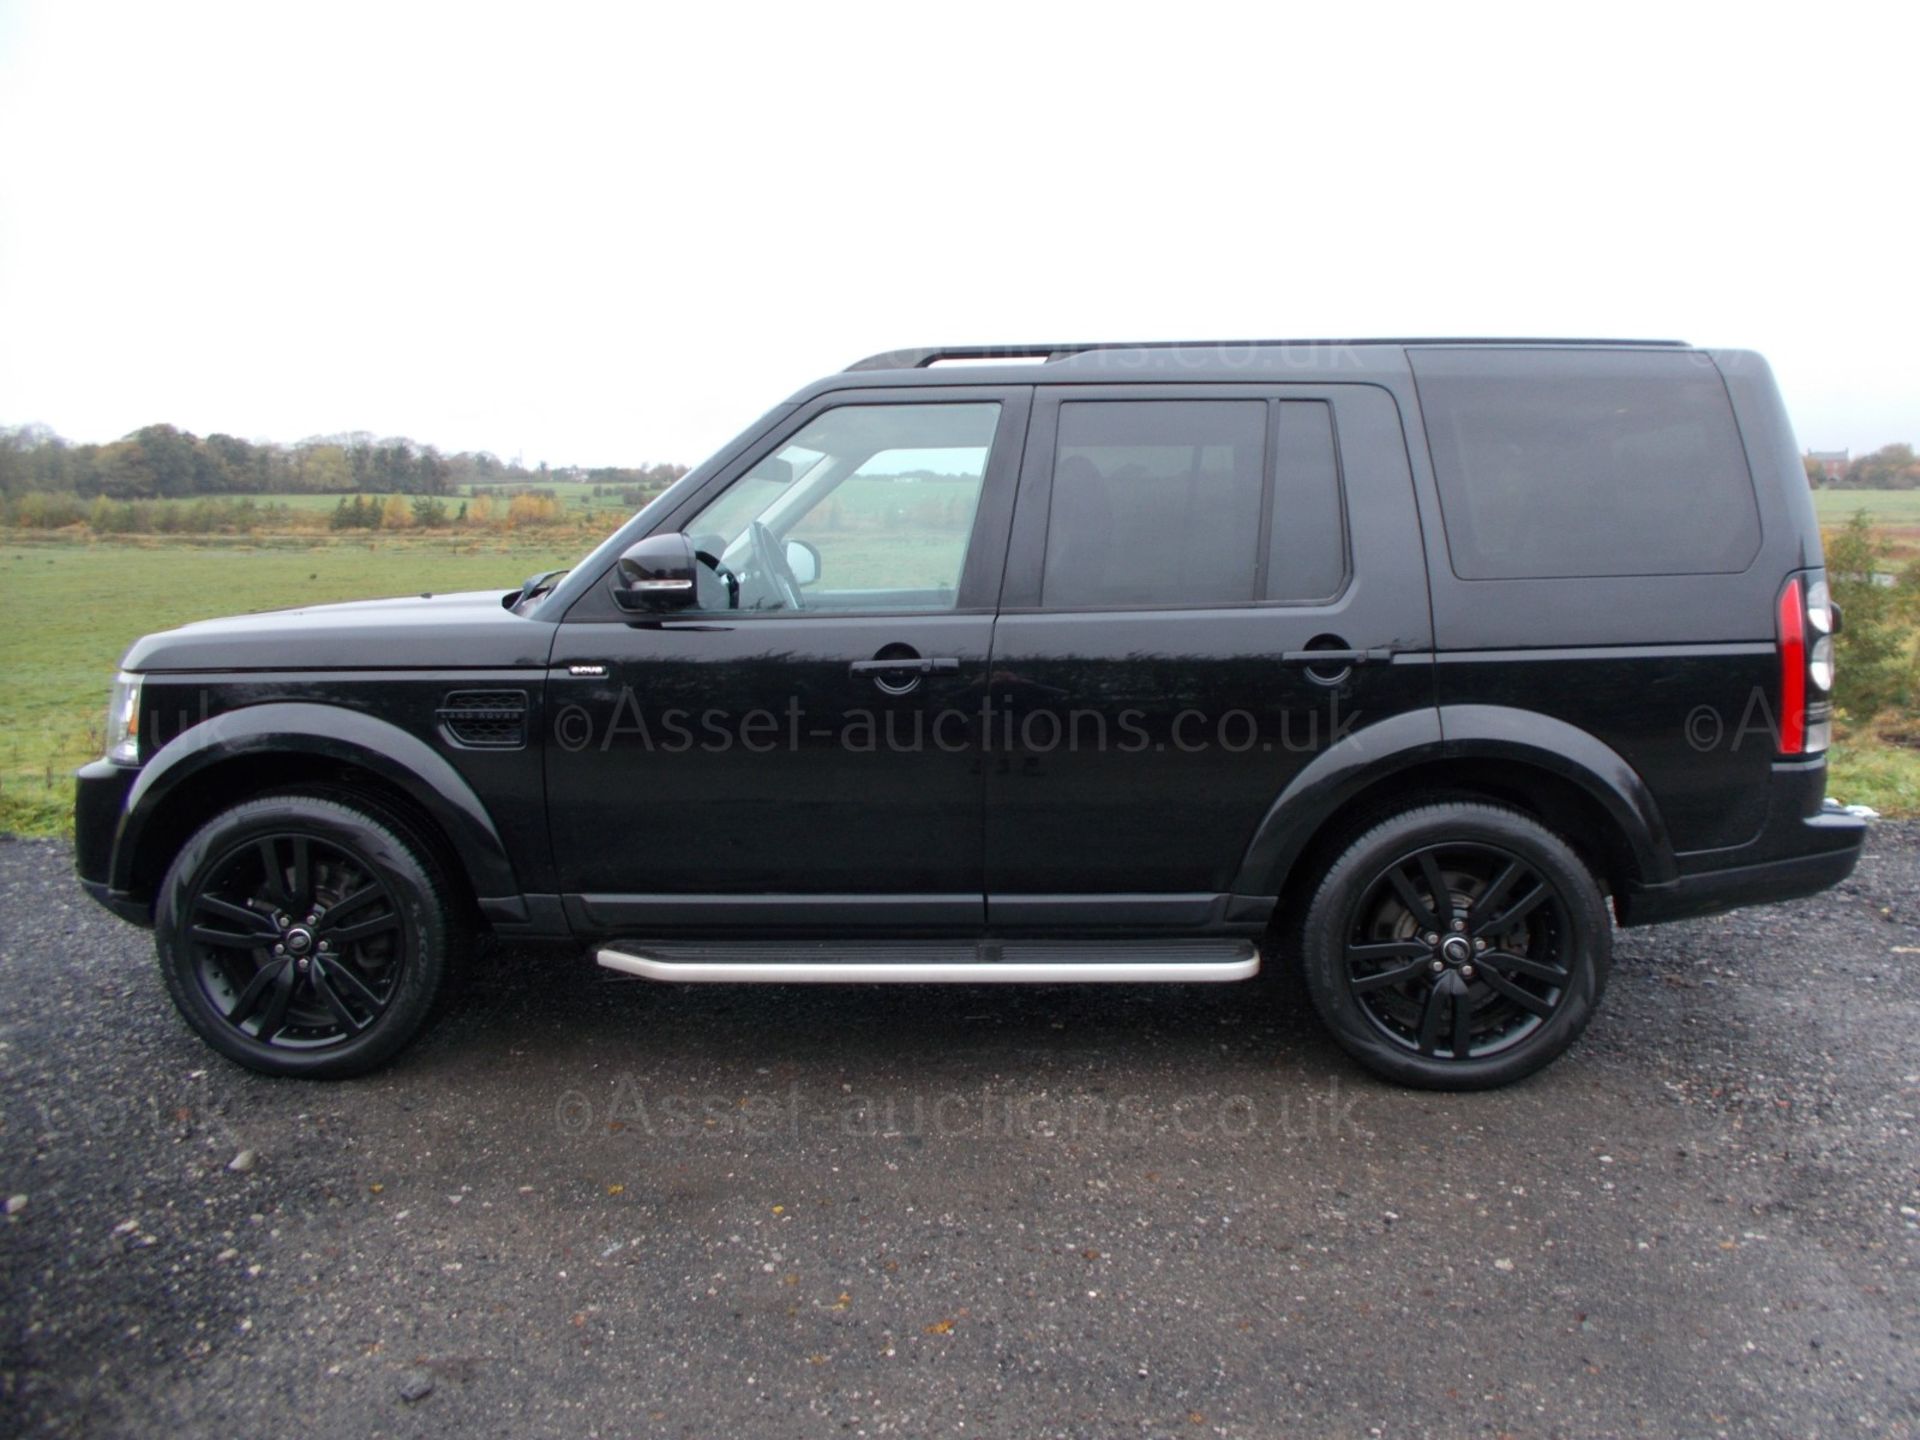 2015/64 LAND ROVER DISCOVERY HSE LUXURY SCV6 7 SEATER, 3.0 V6 PETROL SUPERCHARGED *PLUS VAT* - Image 4 of 28